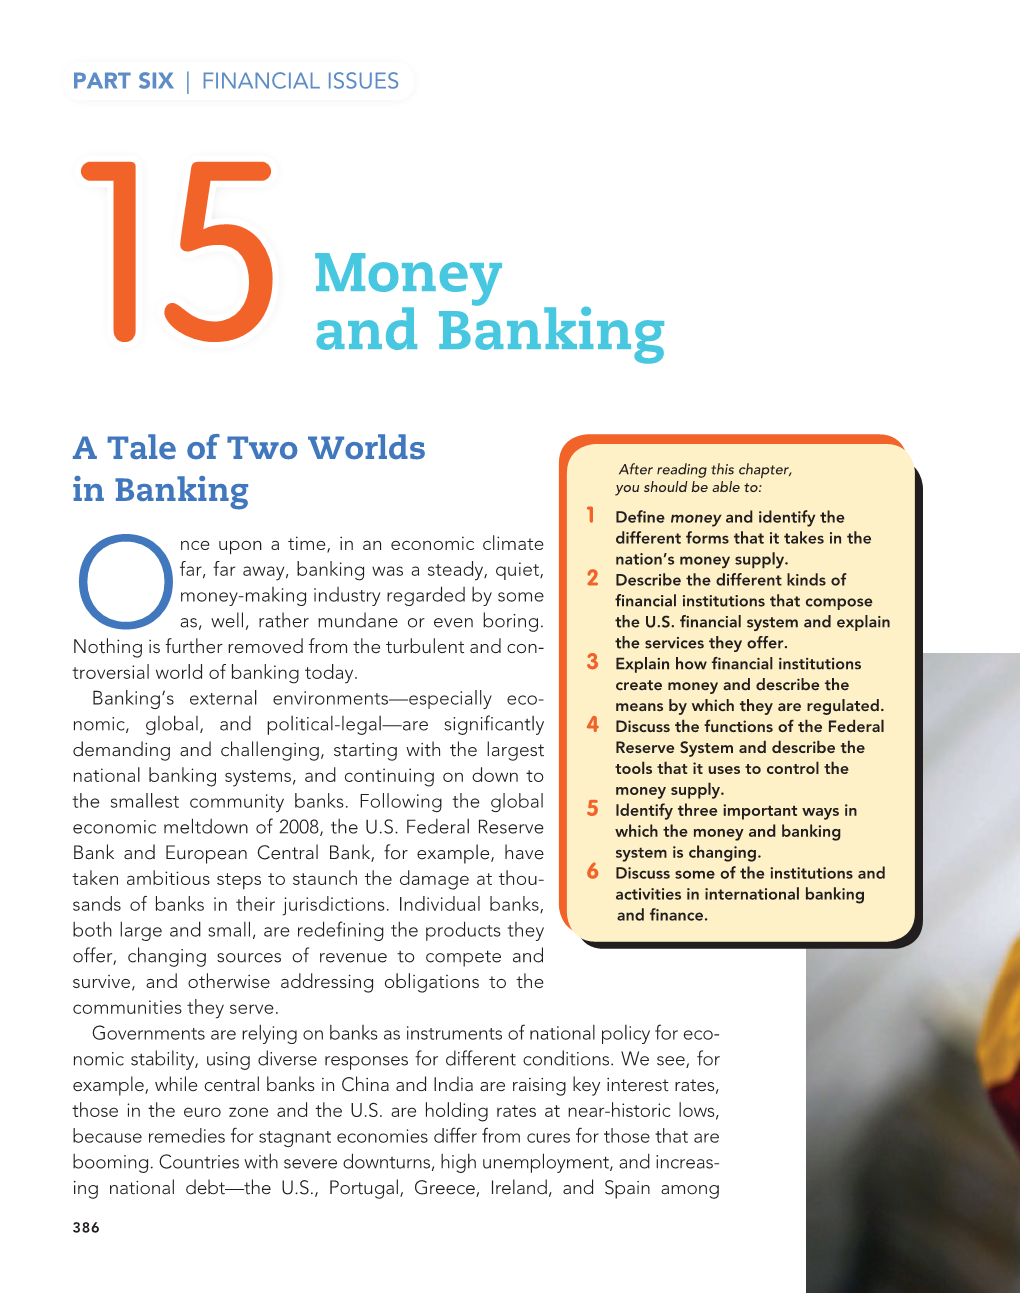 Money and Banking.Pdf